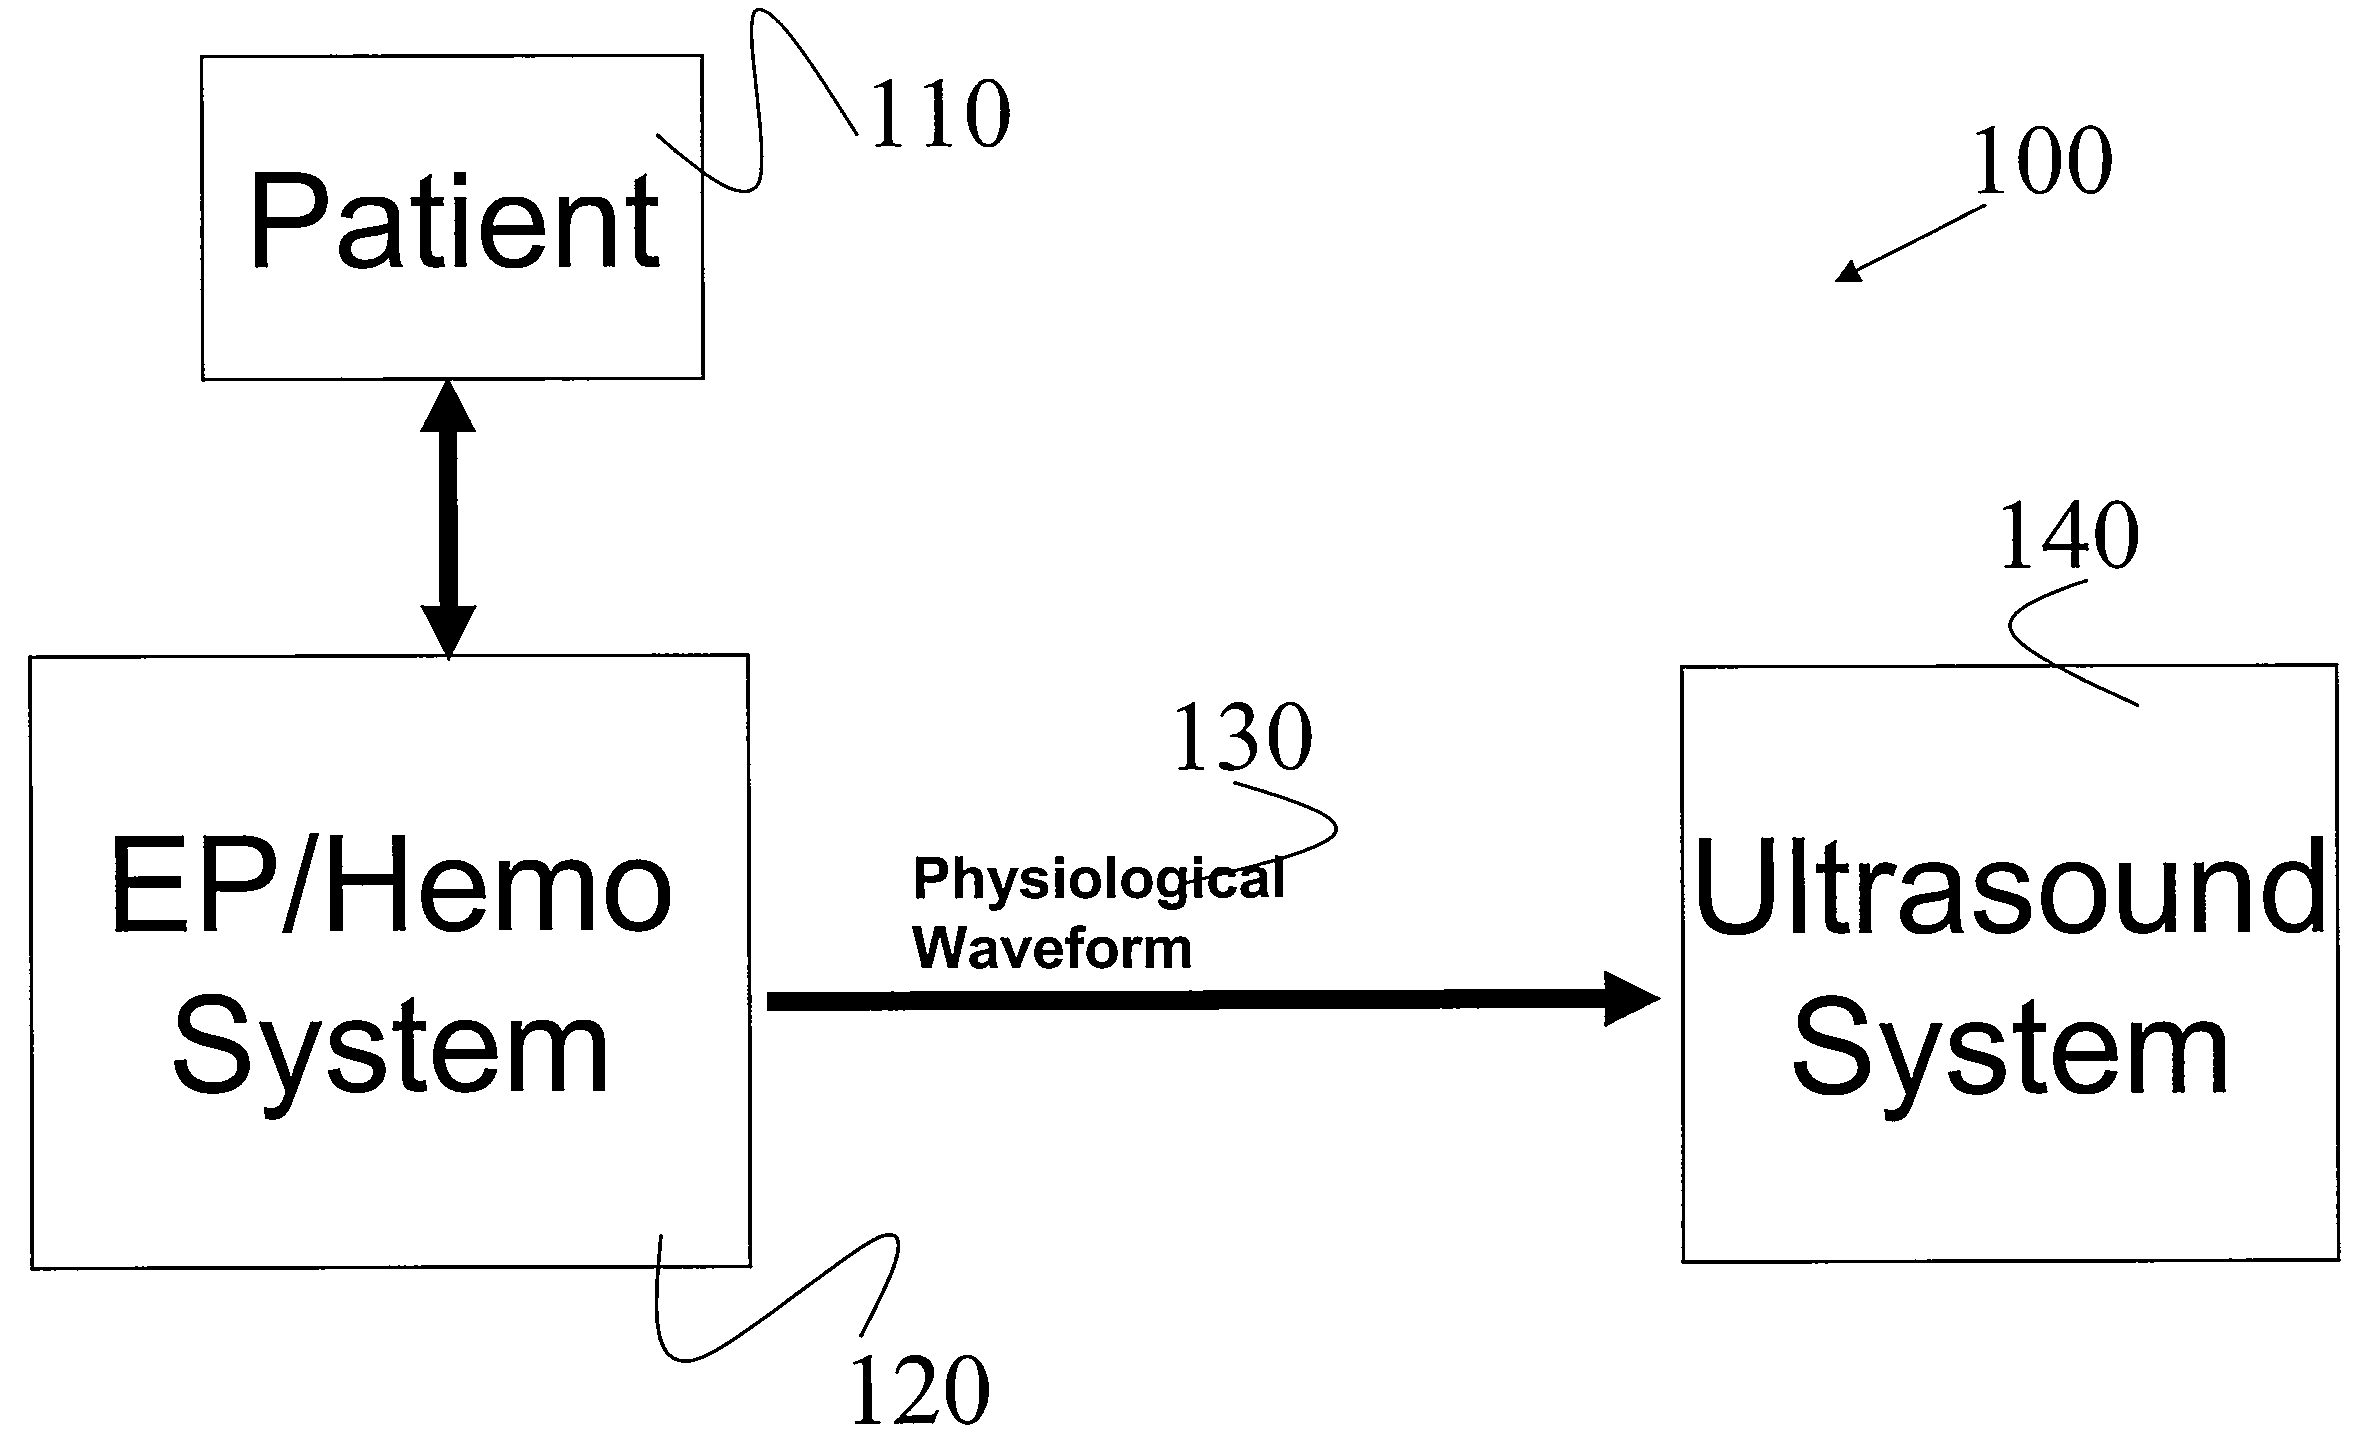 System and method for biometric scan integrated electrophysiology and hemodynamic physiological diagnostic monitoring during clinical invasive procedures